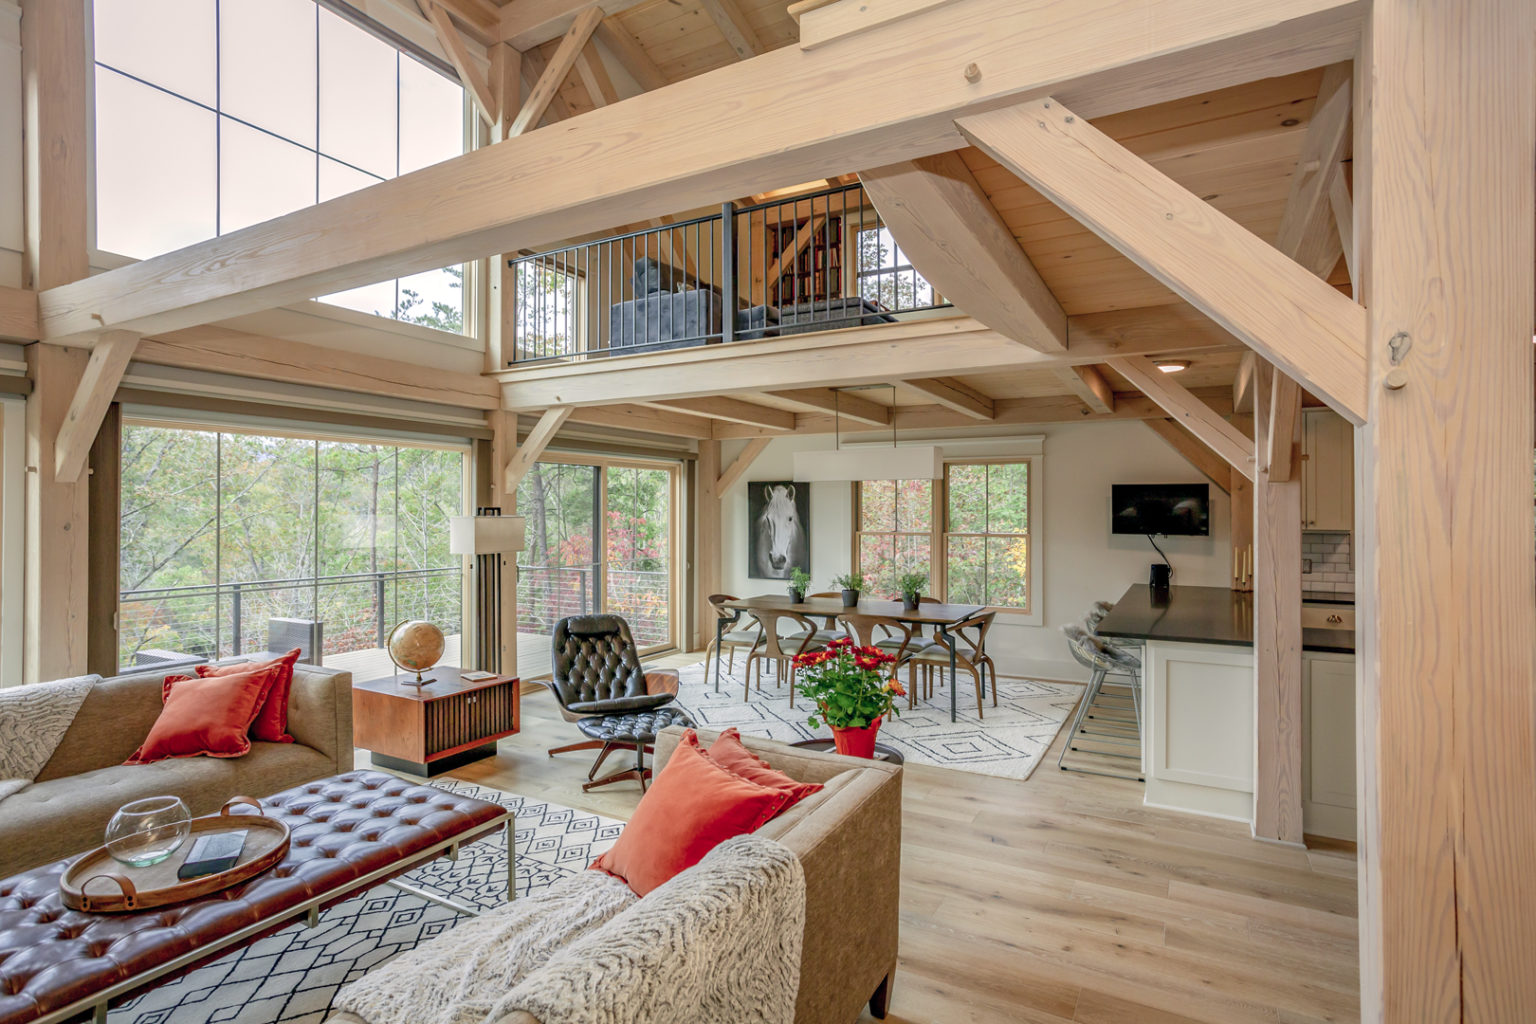 Timber Frame Great Room by Woodhouse, The Timber Frame Company